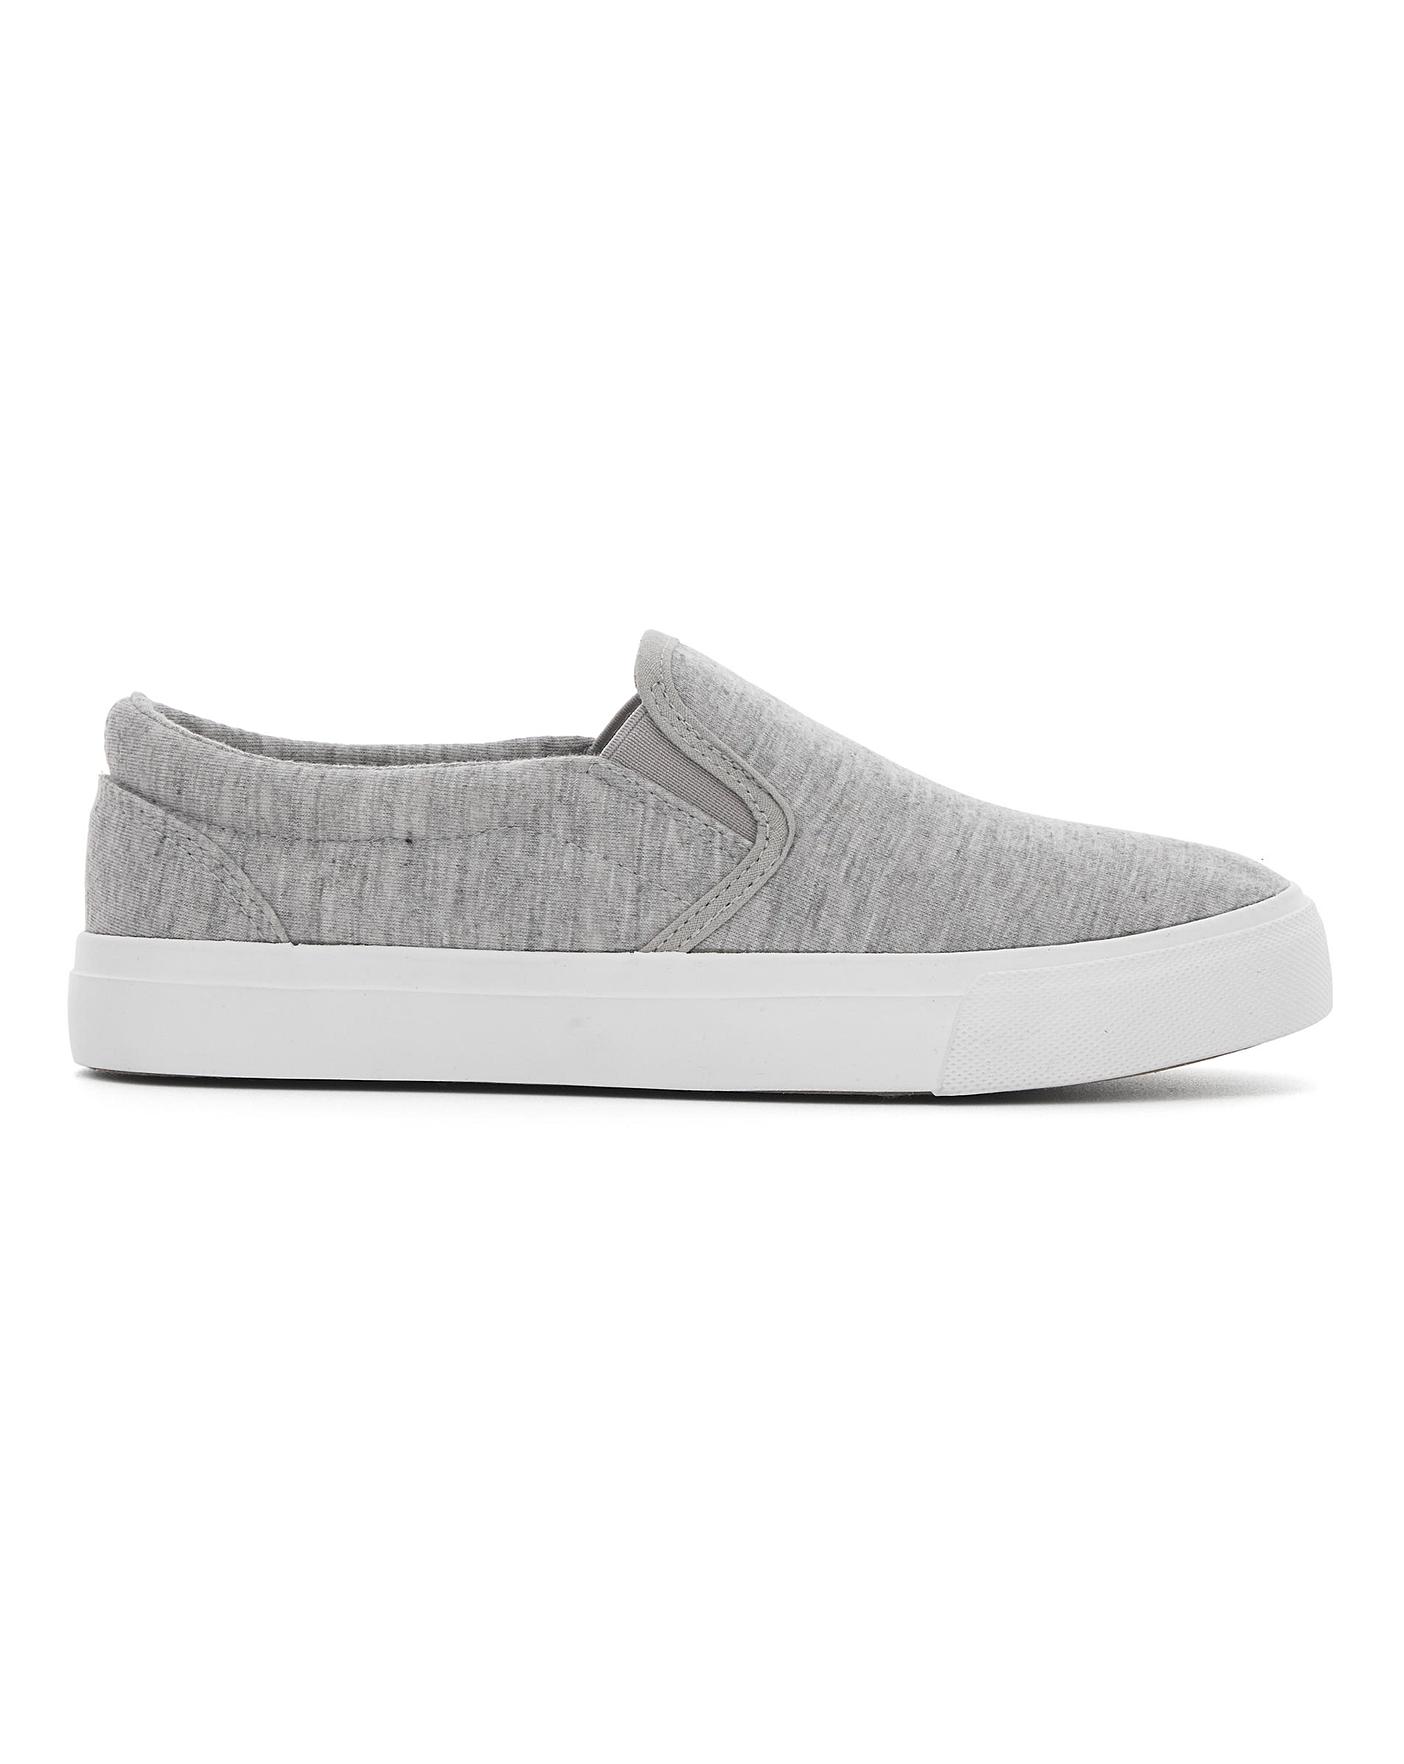 extra wide canvas sneakers